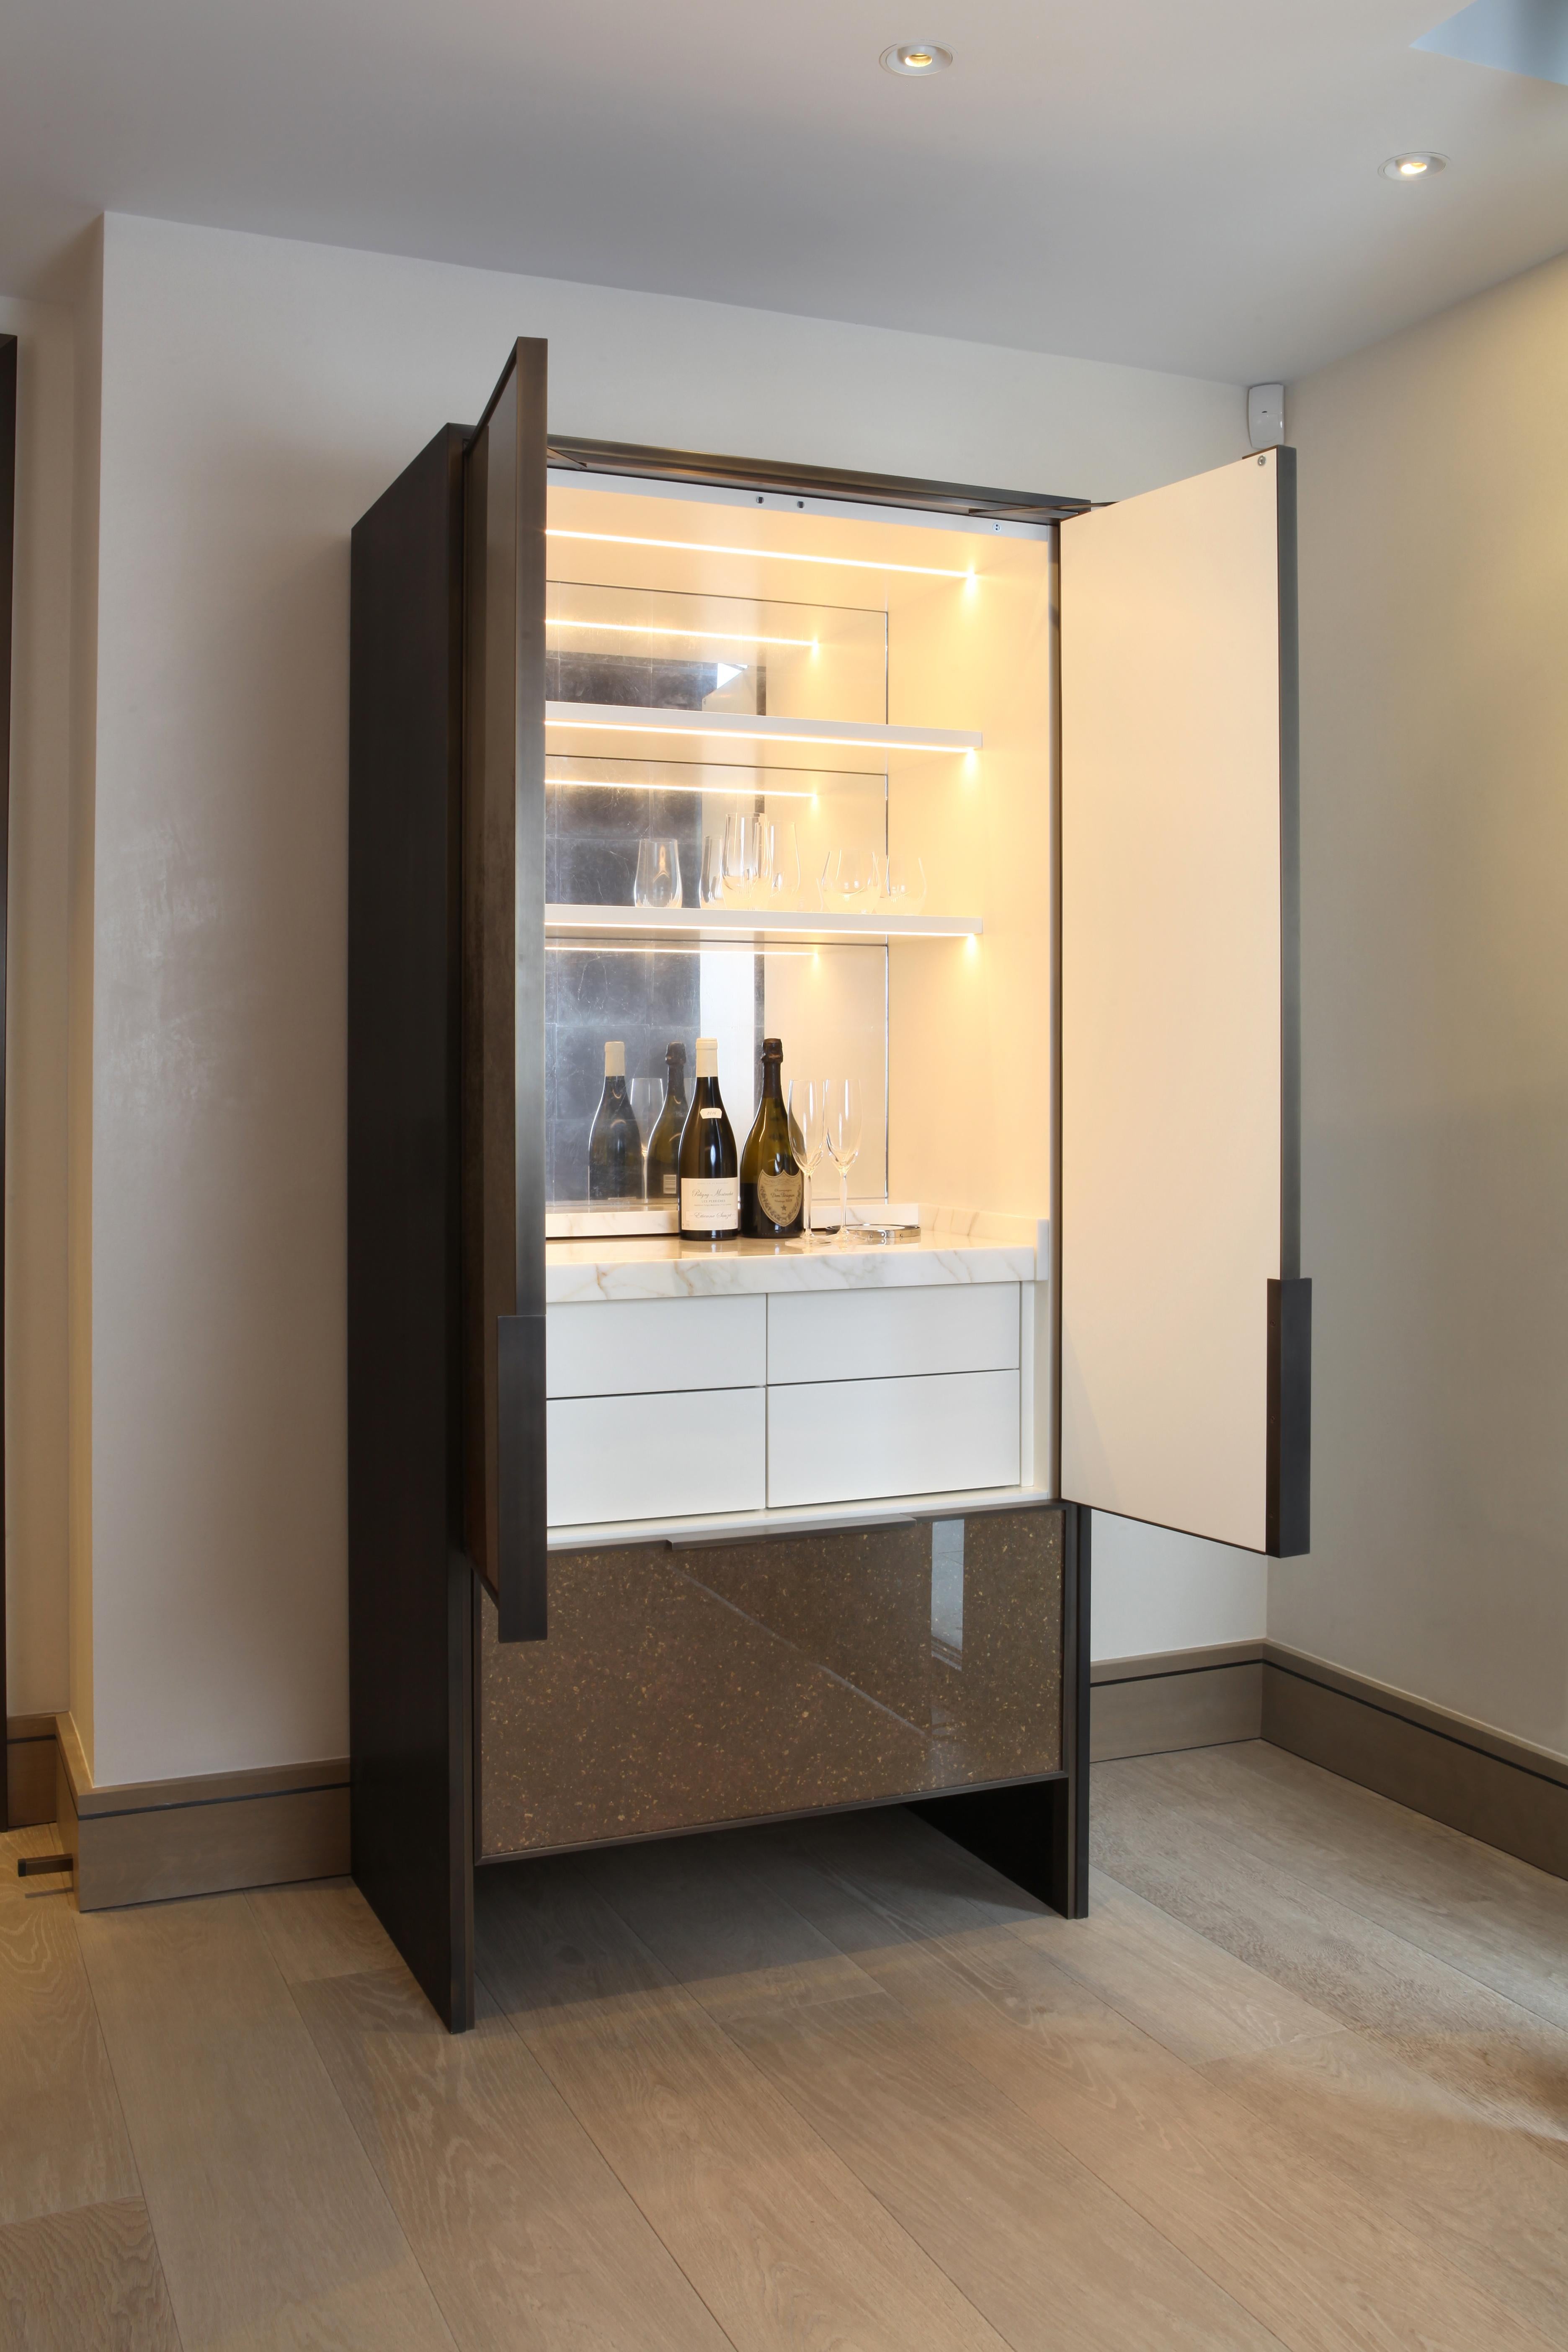 Designed by award winning Los Angeles based designer Luis Ortega. 

Freestanding cocktail cabinet created form a bronze panel carcase; with bronze framed doors with verre églomisé bronze and gold glass inset panels.
Internally illuminated interior